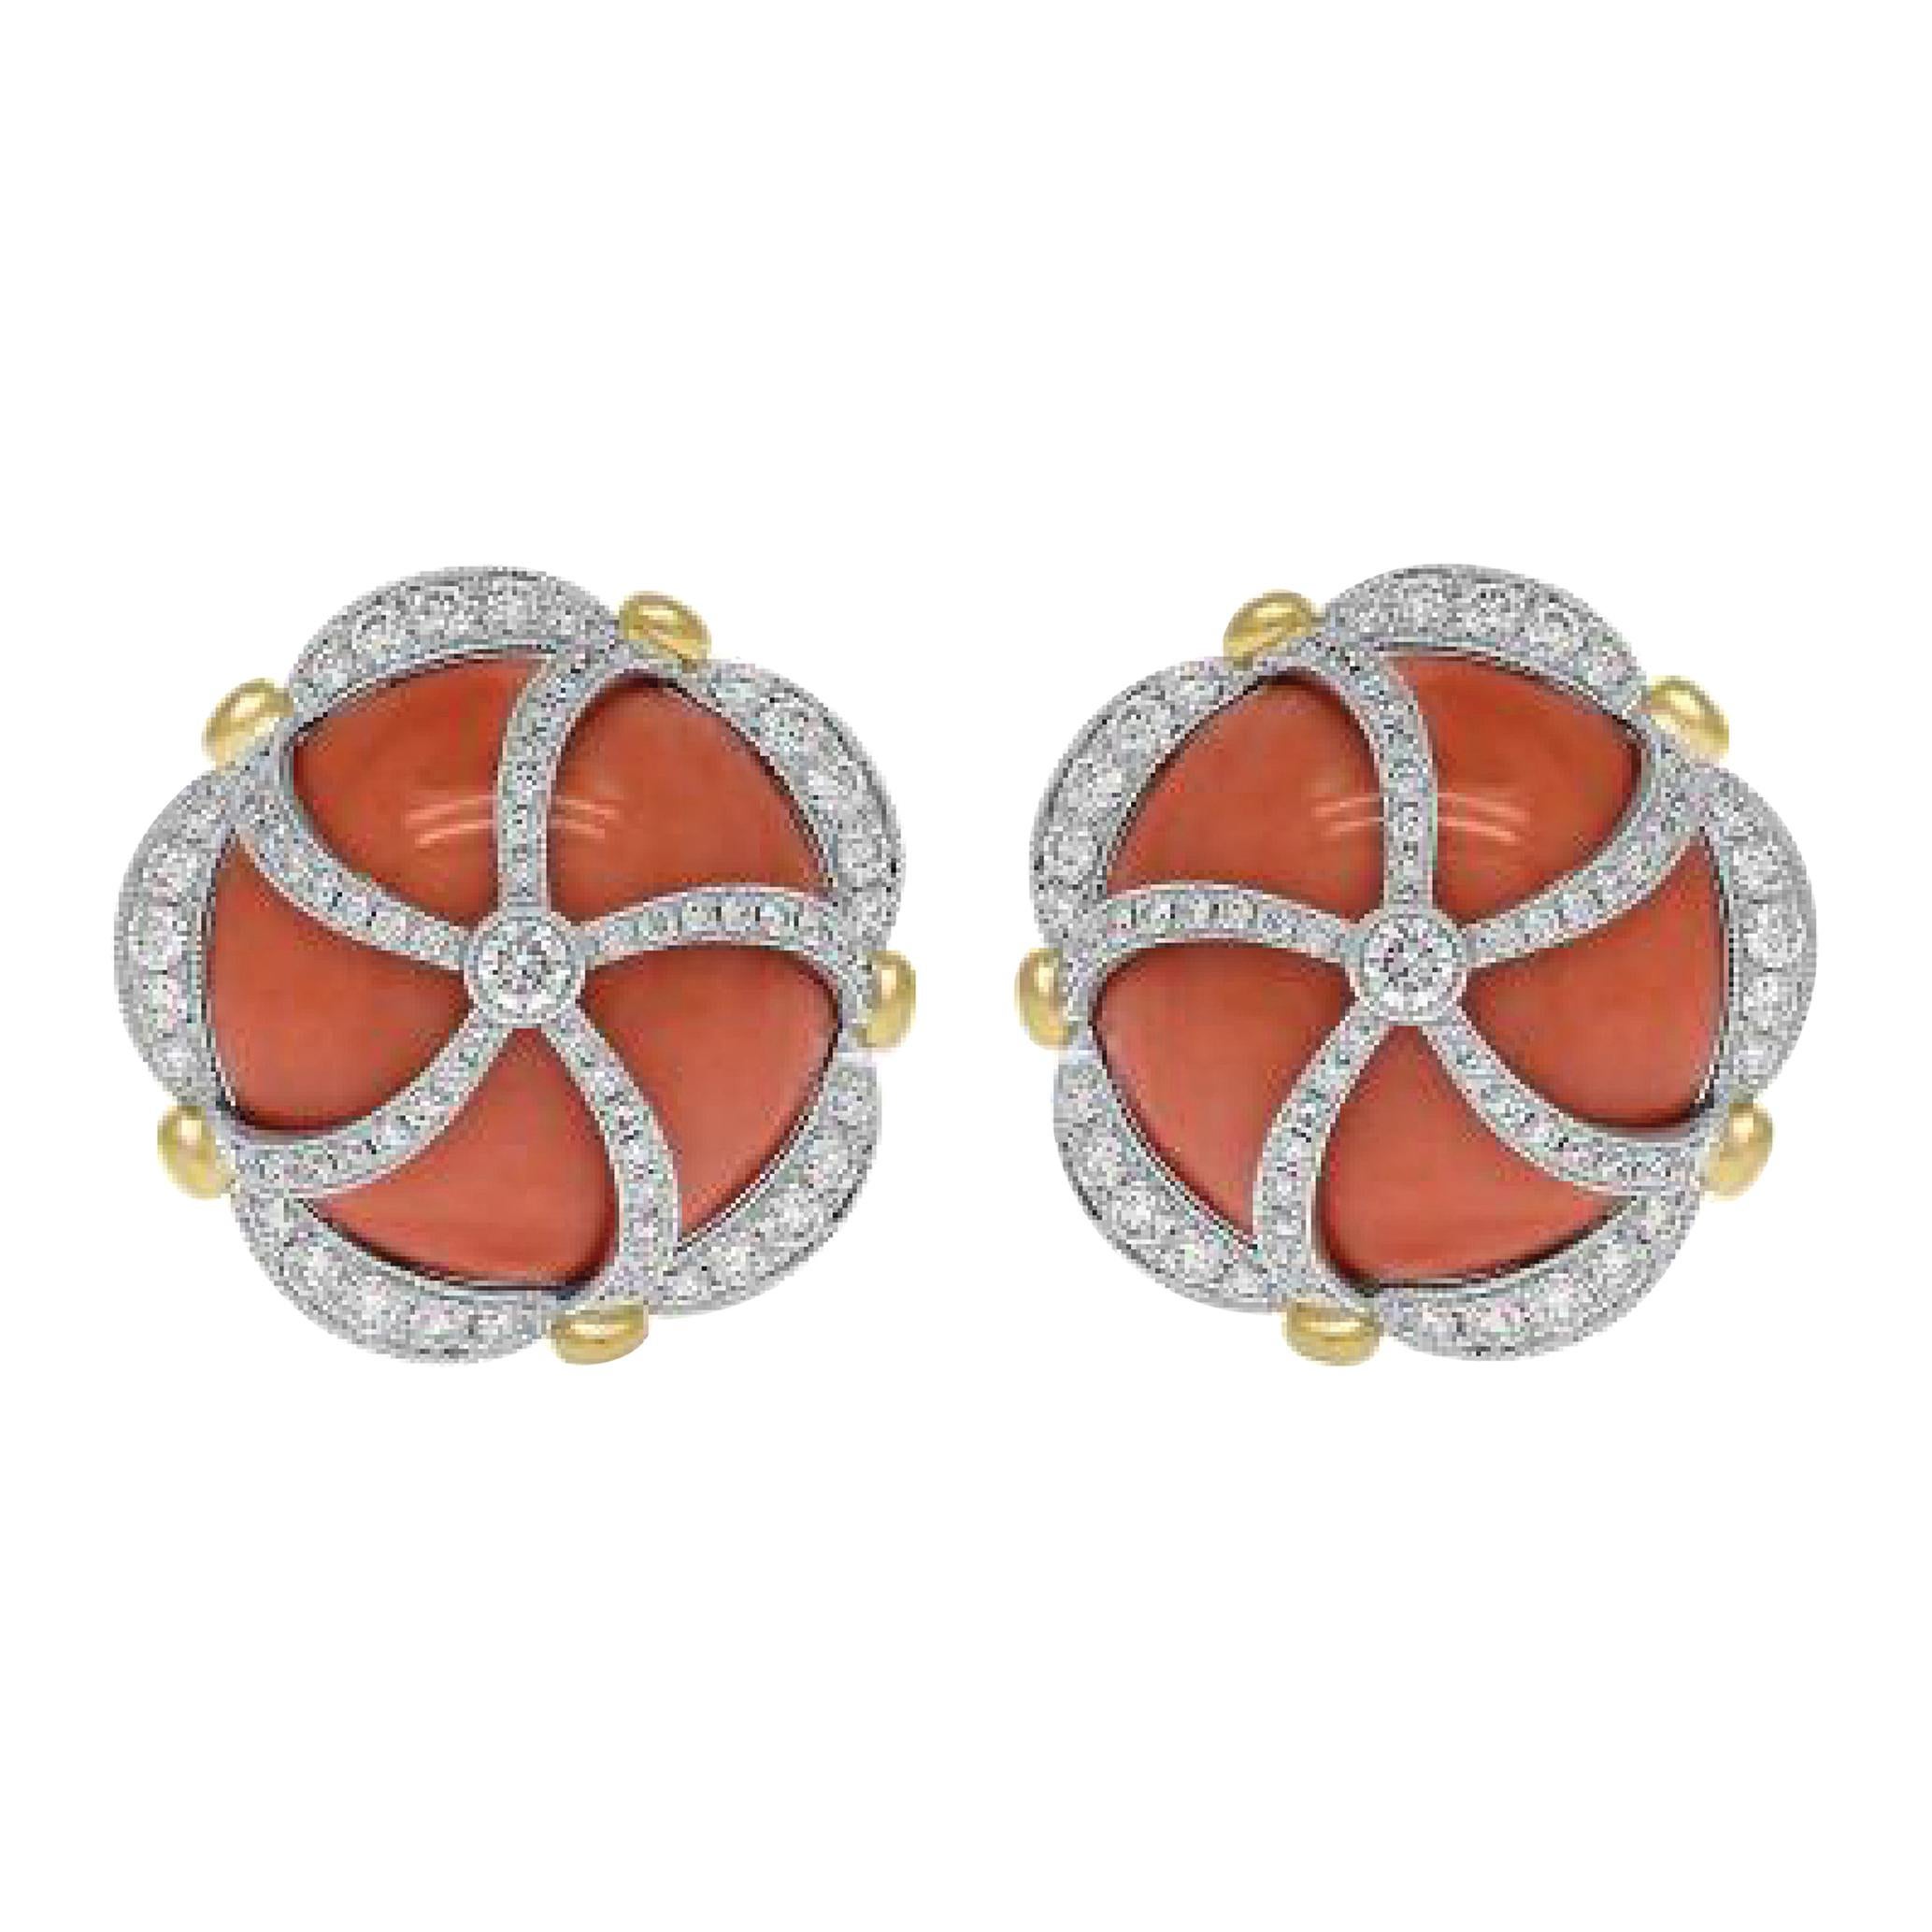 Sophia D. 44.60 Carats of Coral and Diamond Earrings in Platinum